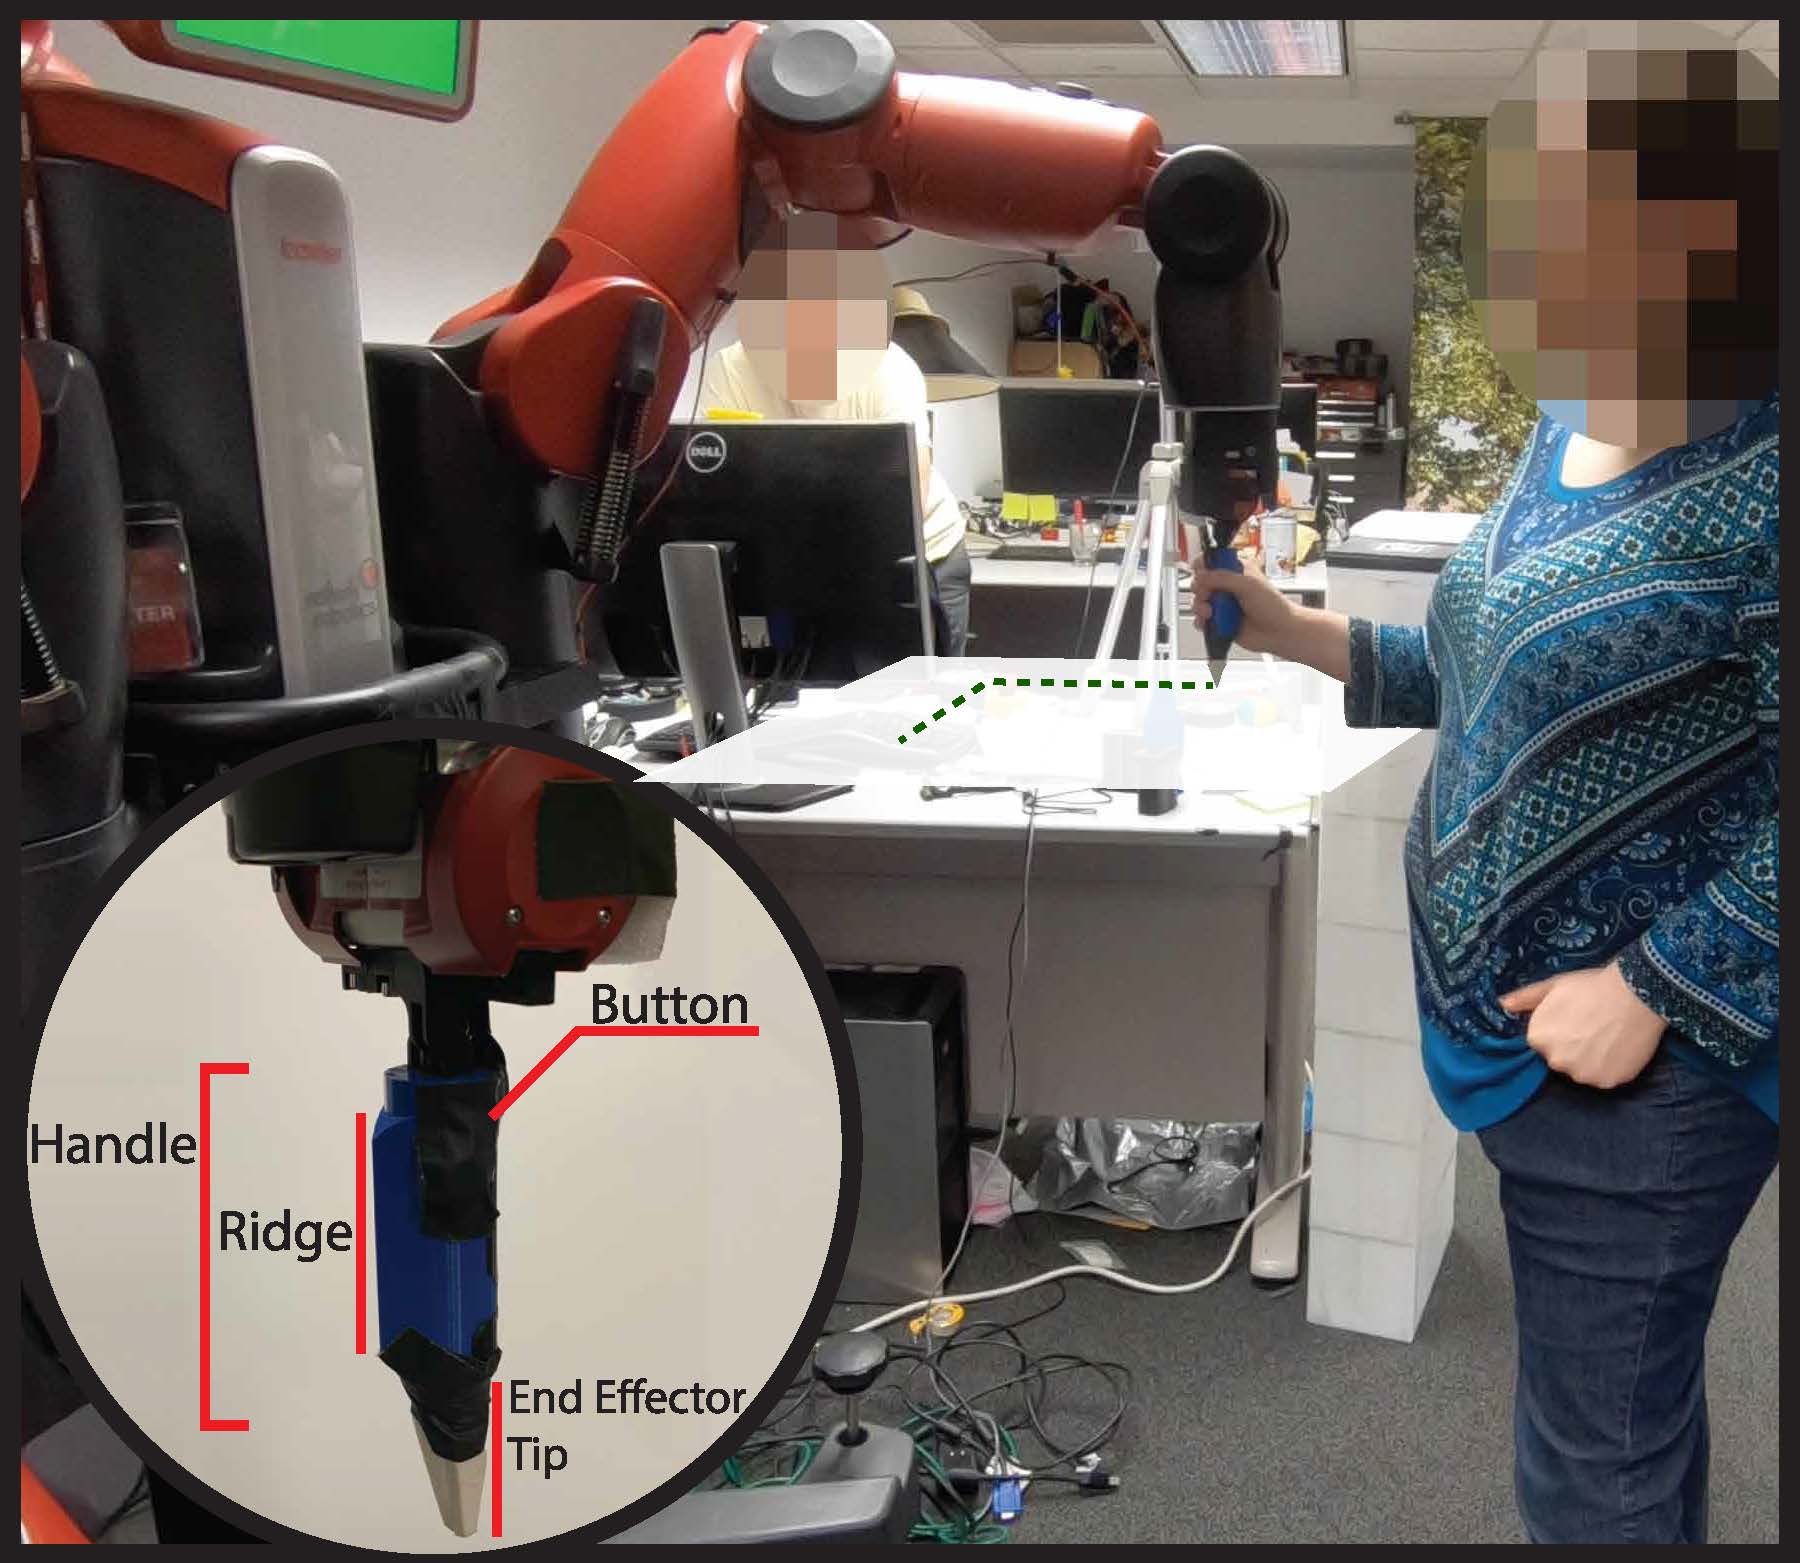 A person with visual impairment with their face blurred interacting with a stationary robot. It also show the gripper of the robot where it has a ridge to point direction and also a button.